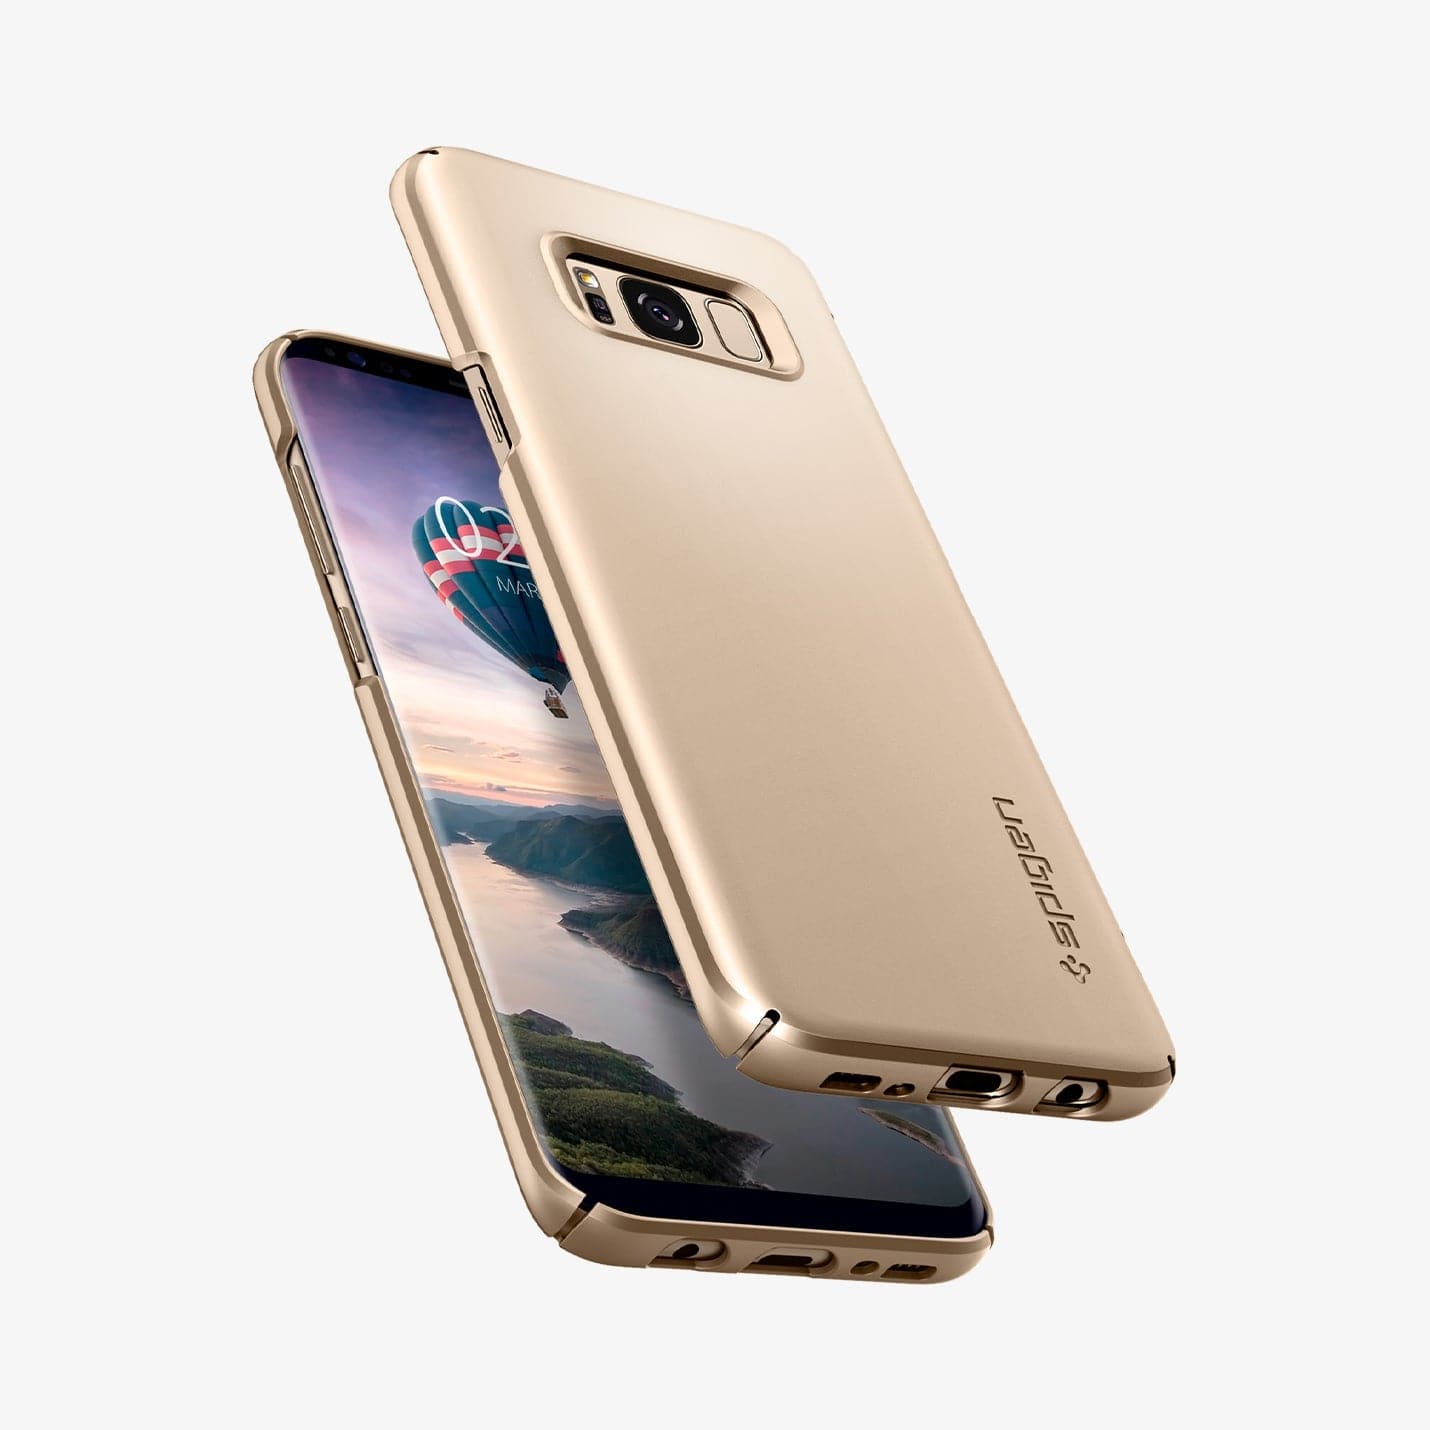 565CS21622 - Galaxy S8 Series Thin Fit Case in maple gold showing the back, front and sides